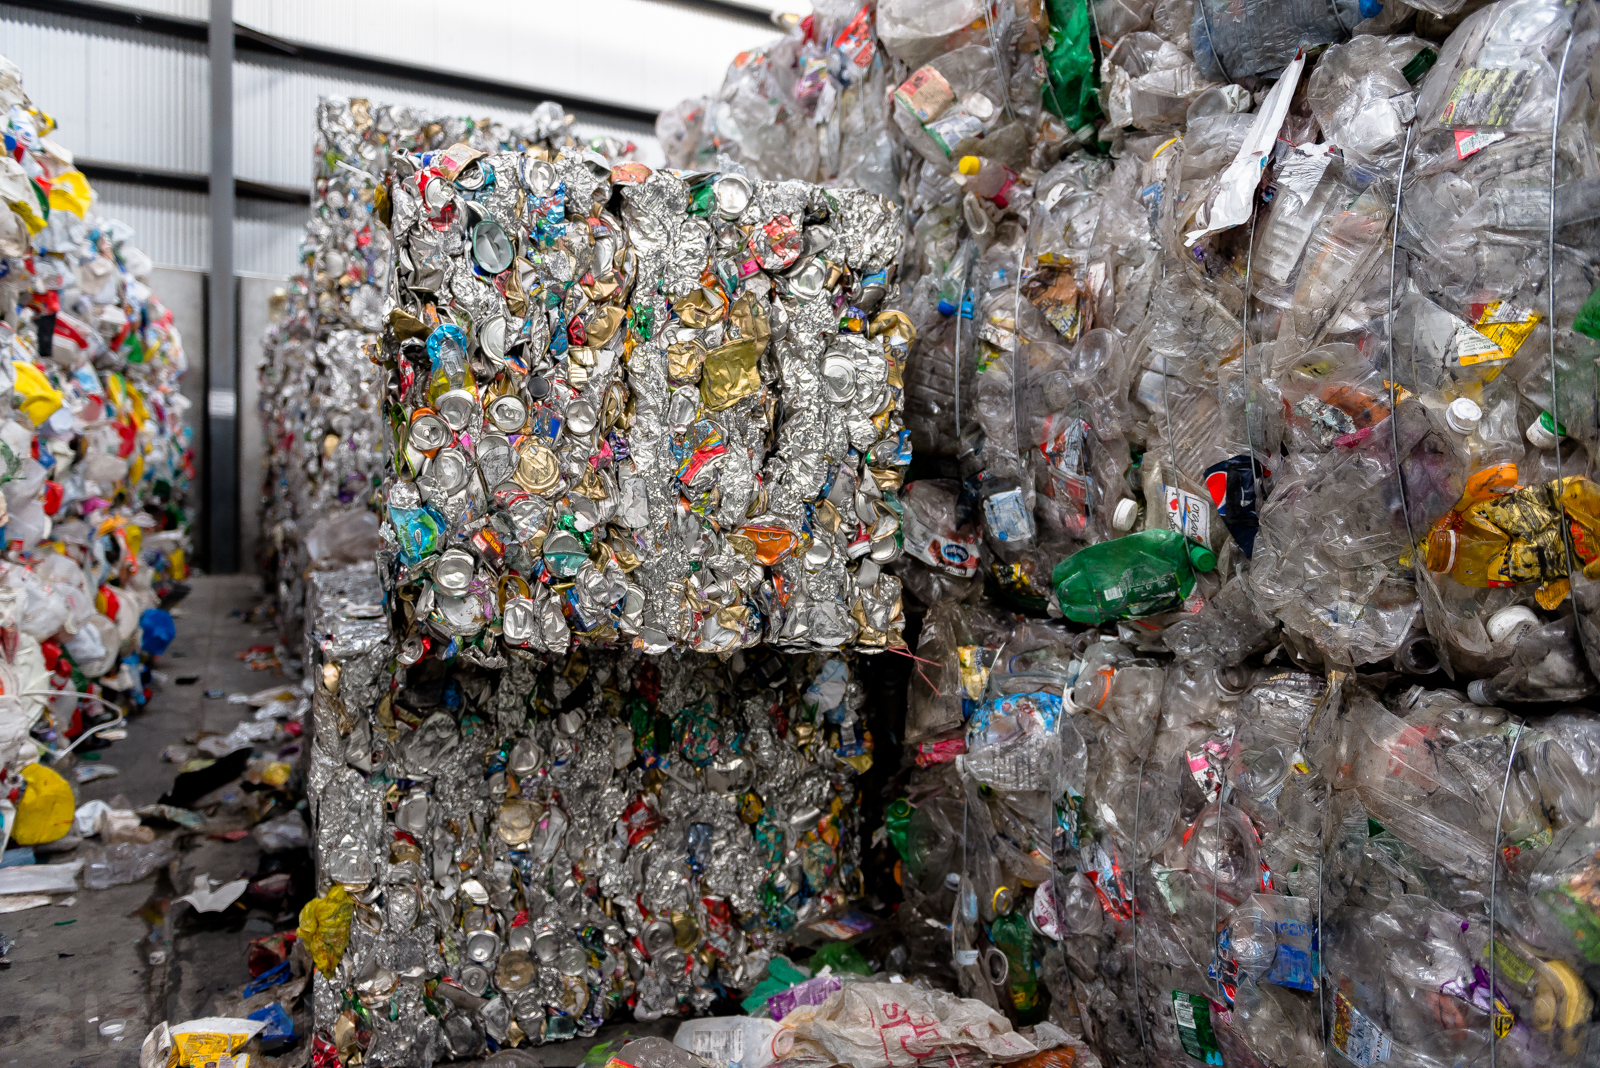 A Tour Of The Largest Commingled Recycling Plant In The US